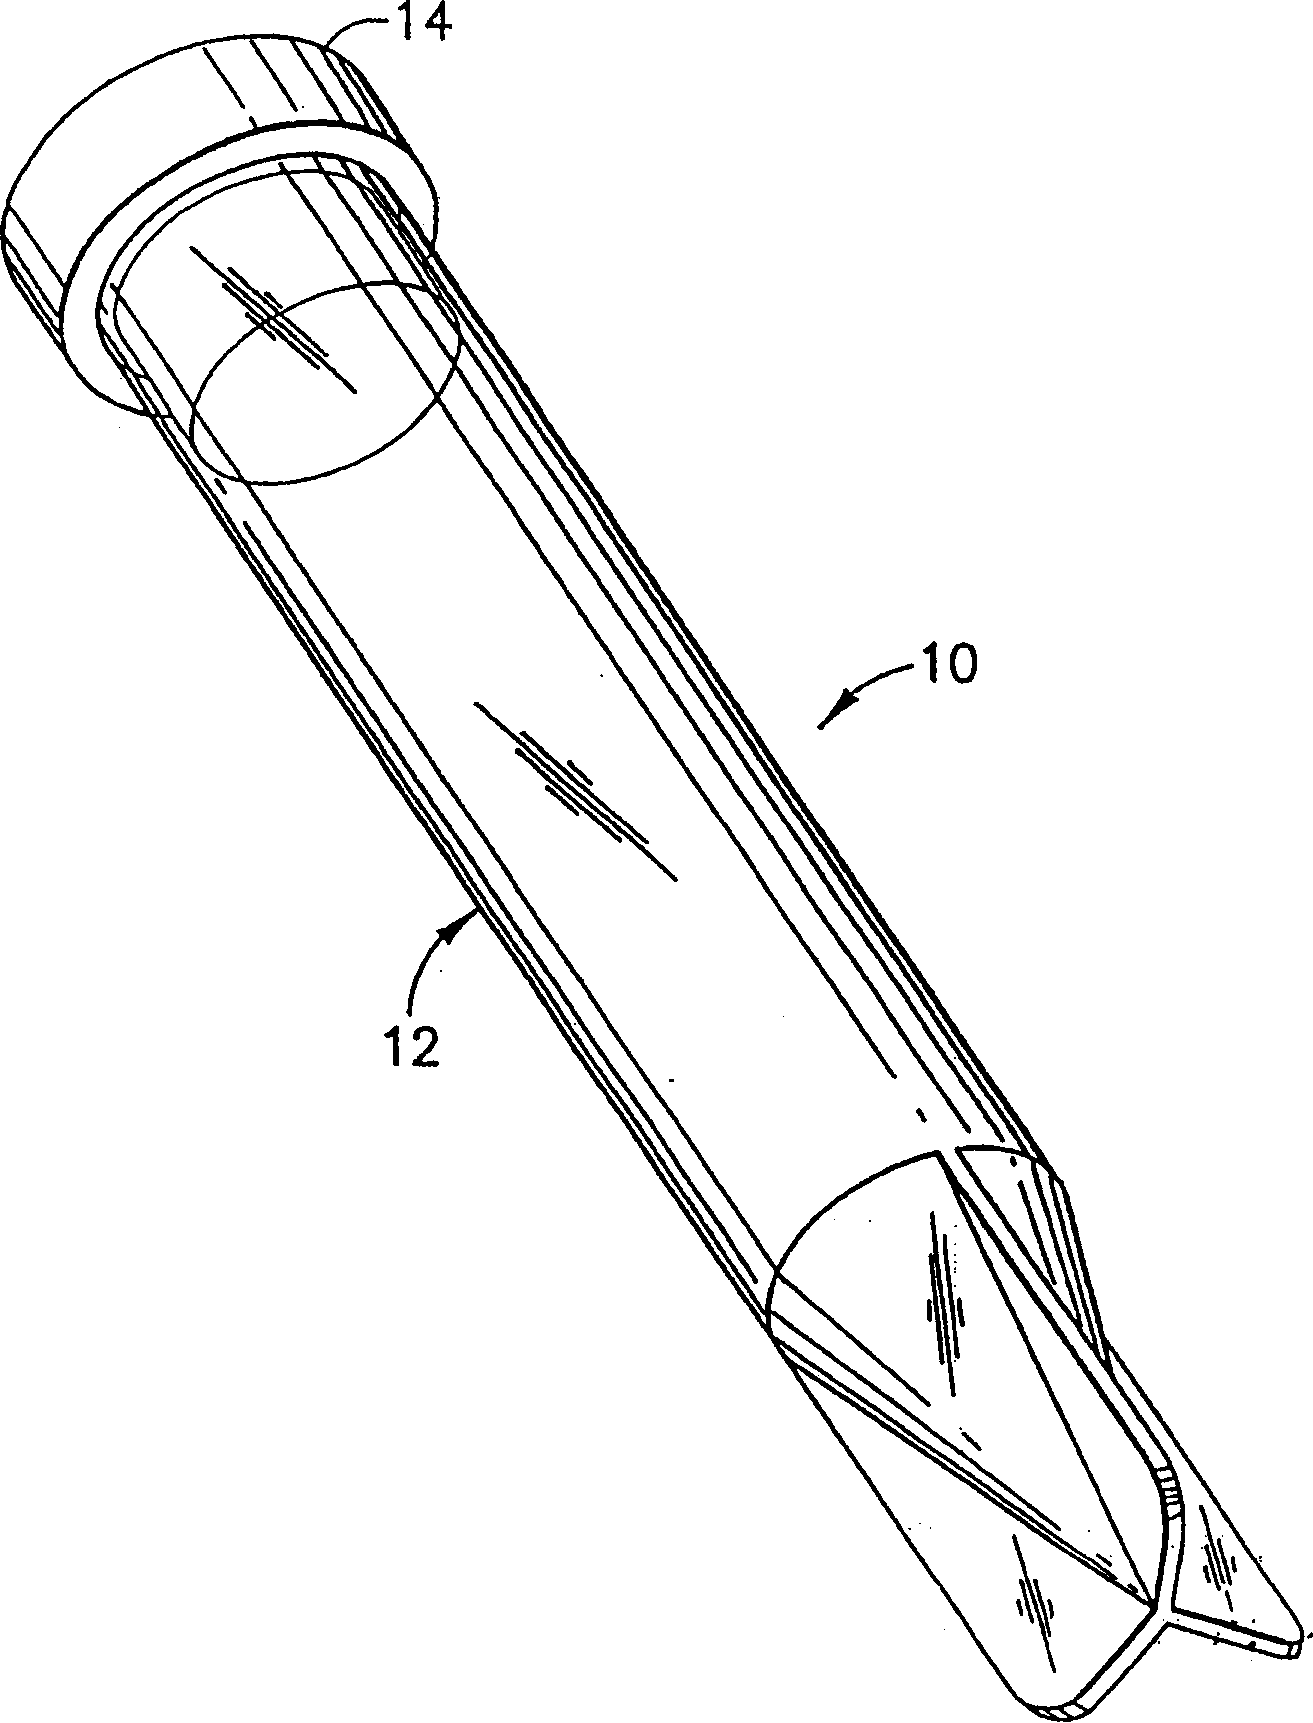 Vacuum tube and microscope inspection, chemical treatment and microbe determination method of urine precipitate